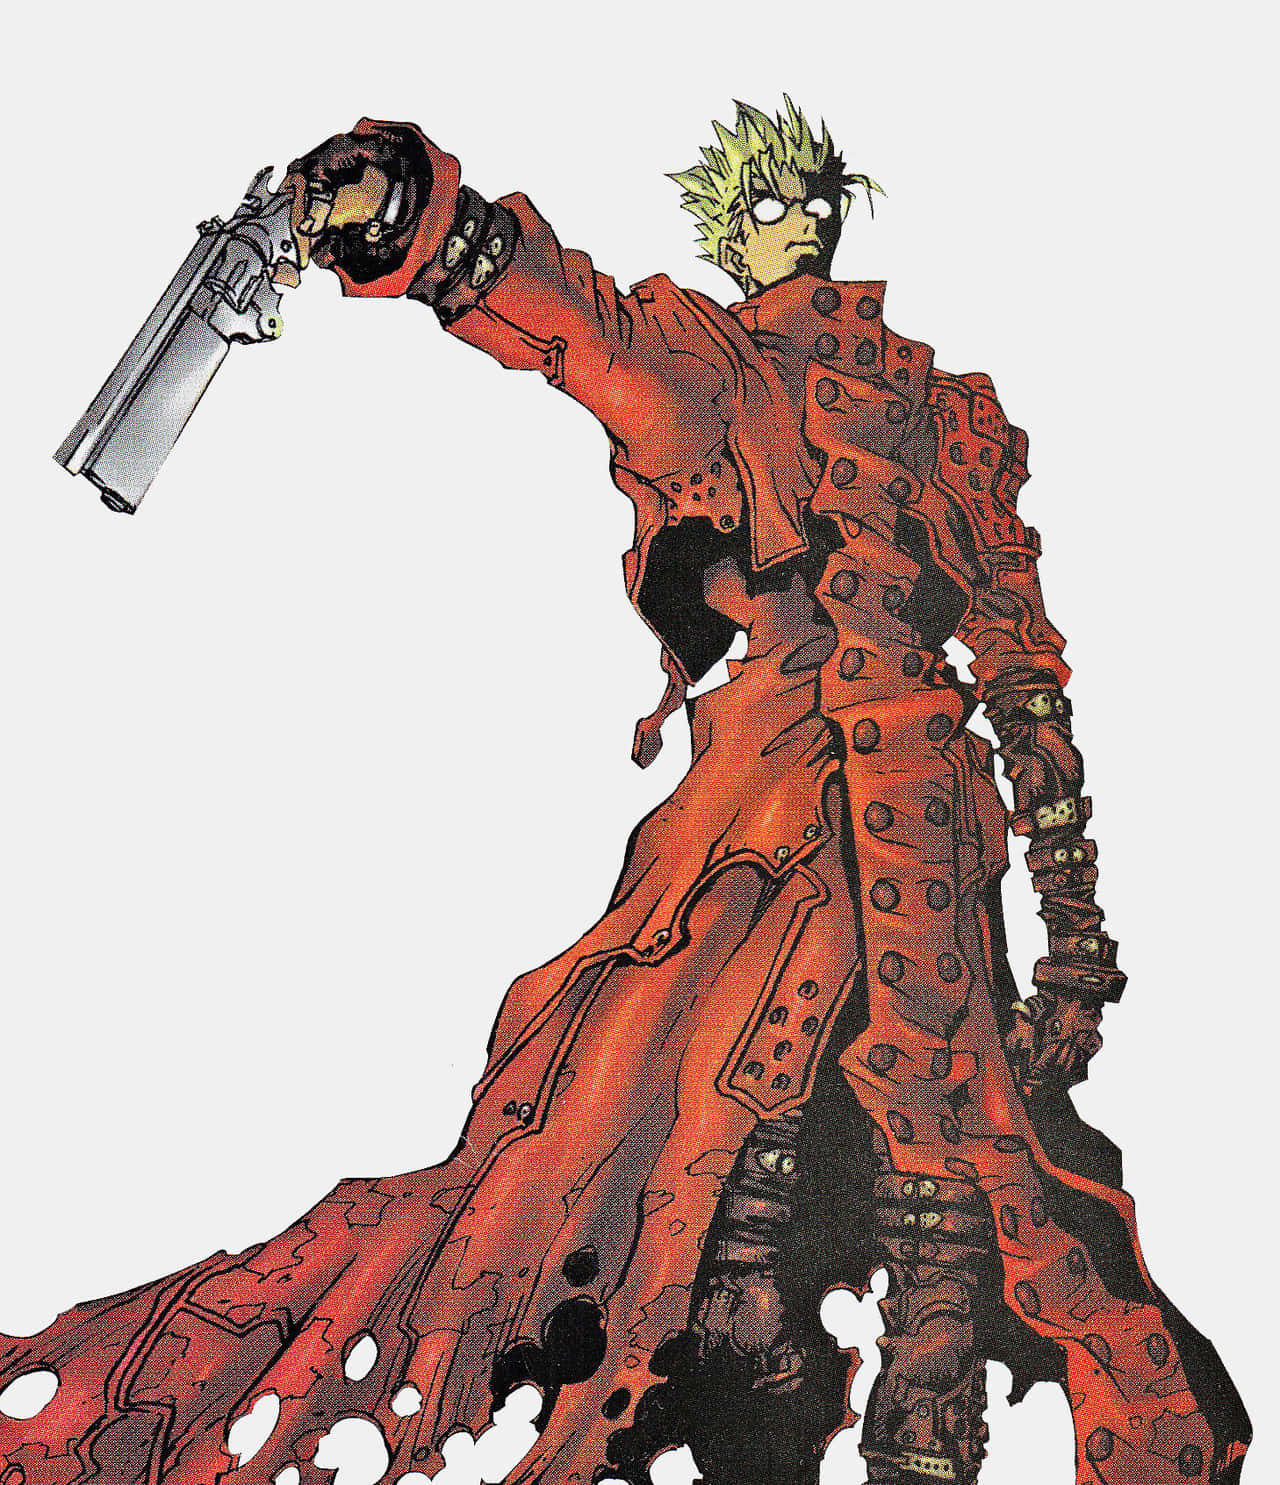 Vash The Stampede poses heroically in this stunning 1280 x 1485 wallpaper. Wallpaper